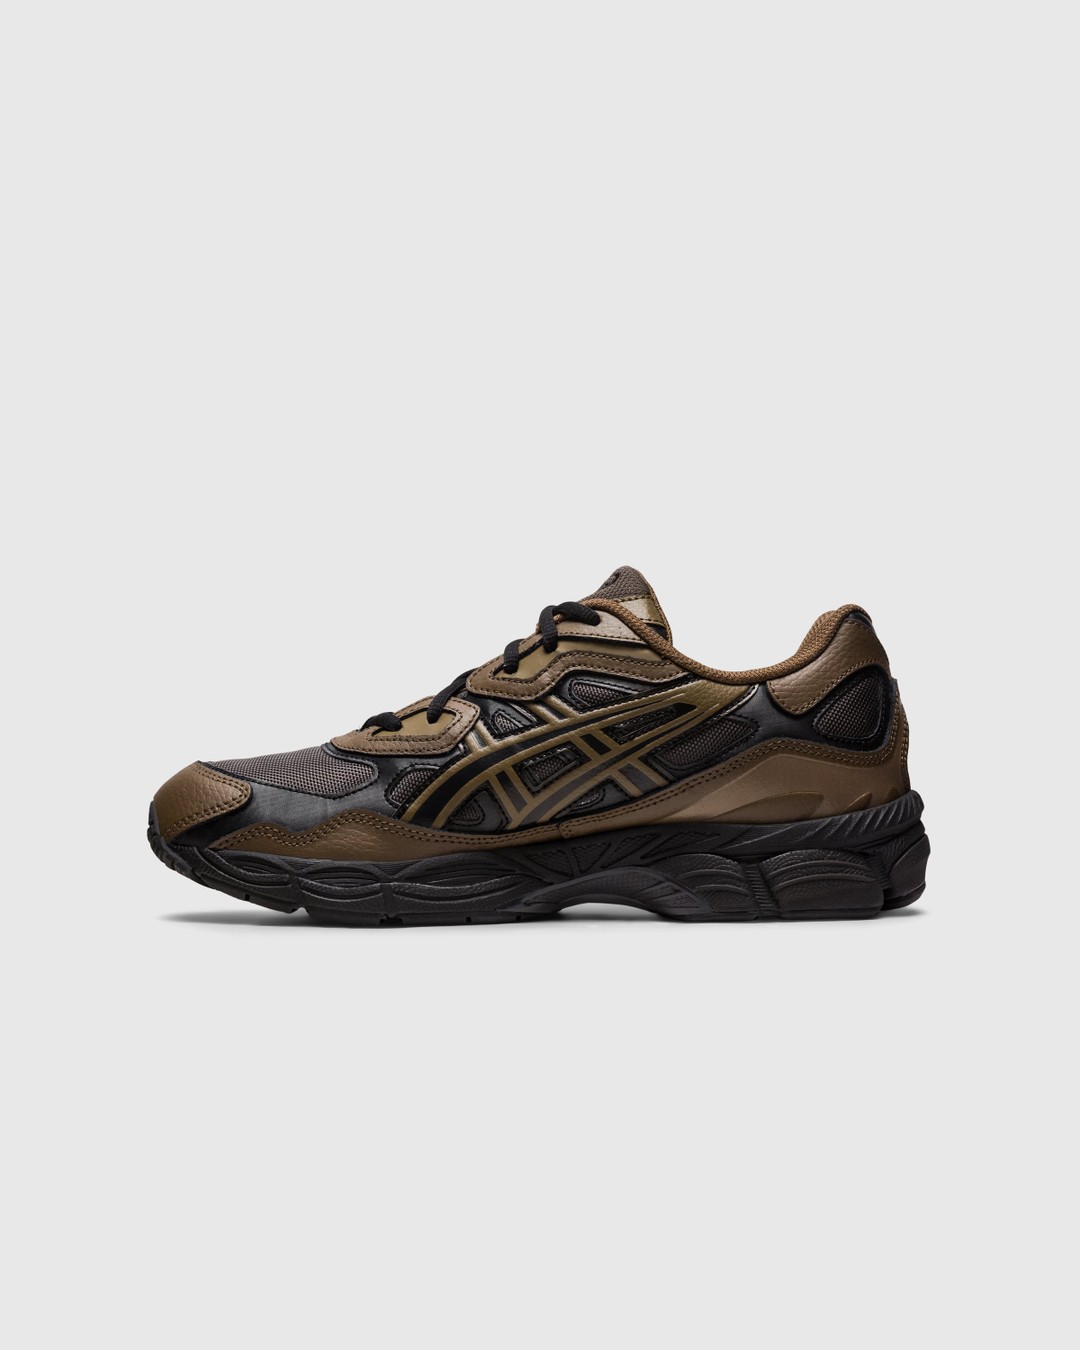 asics – GEL-NYC Dark Sepia/Clay Canyon - Sneakers - Multi - Image 2